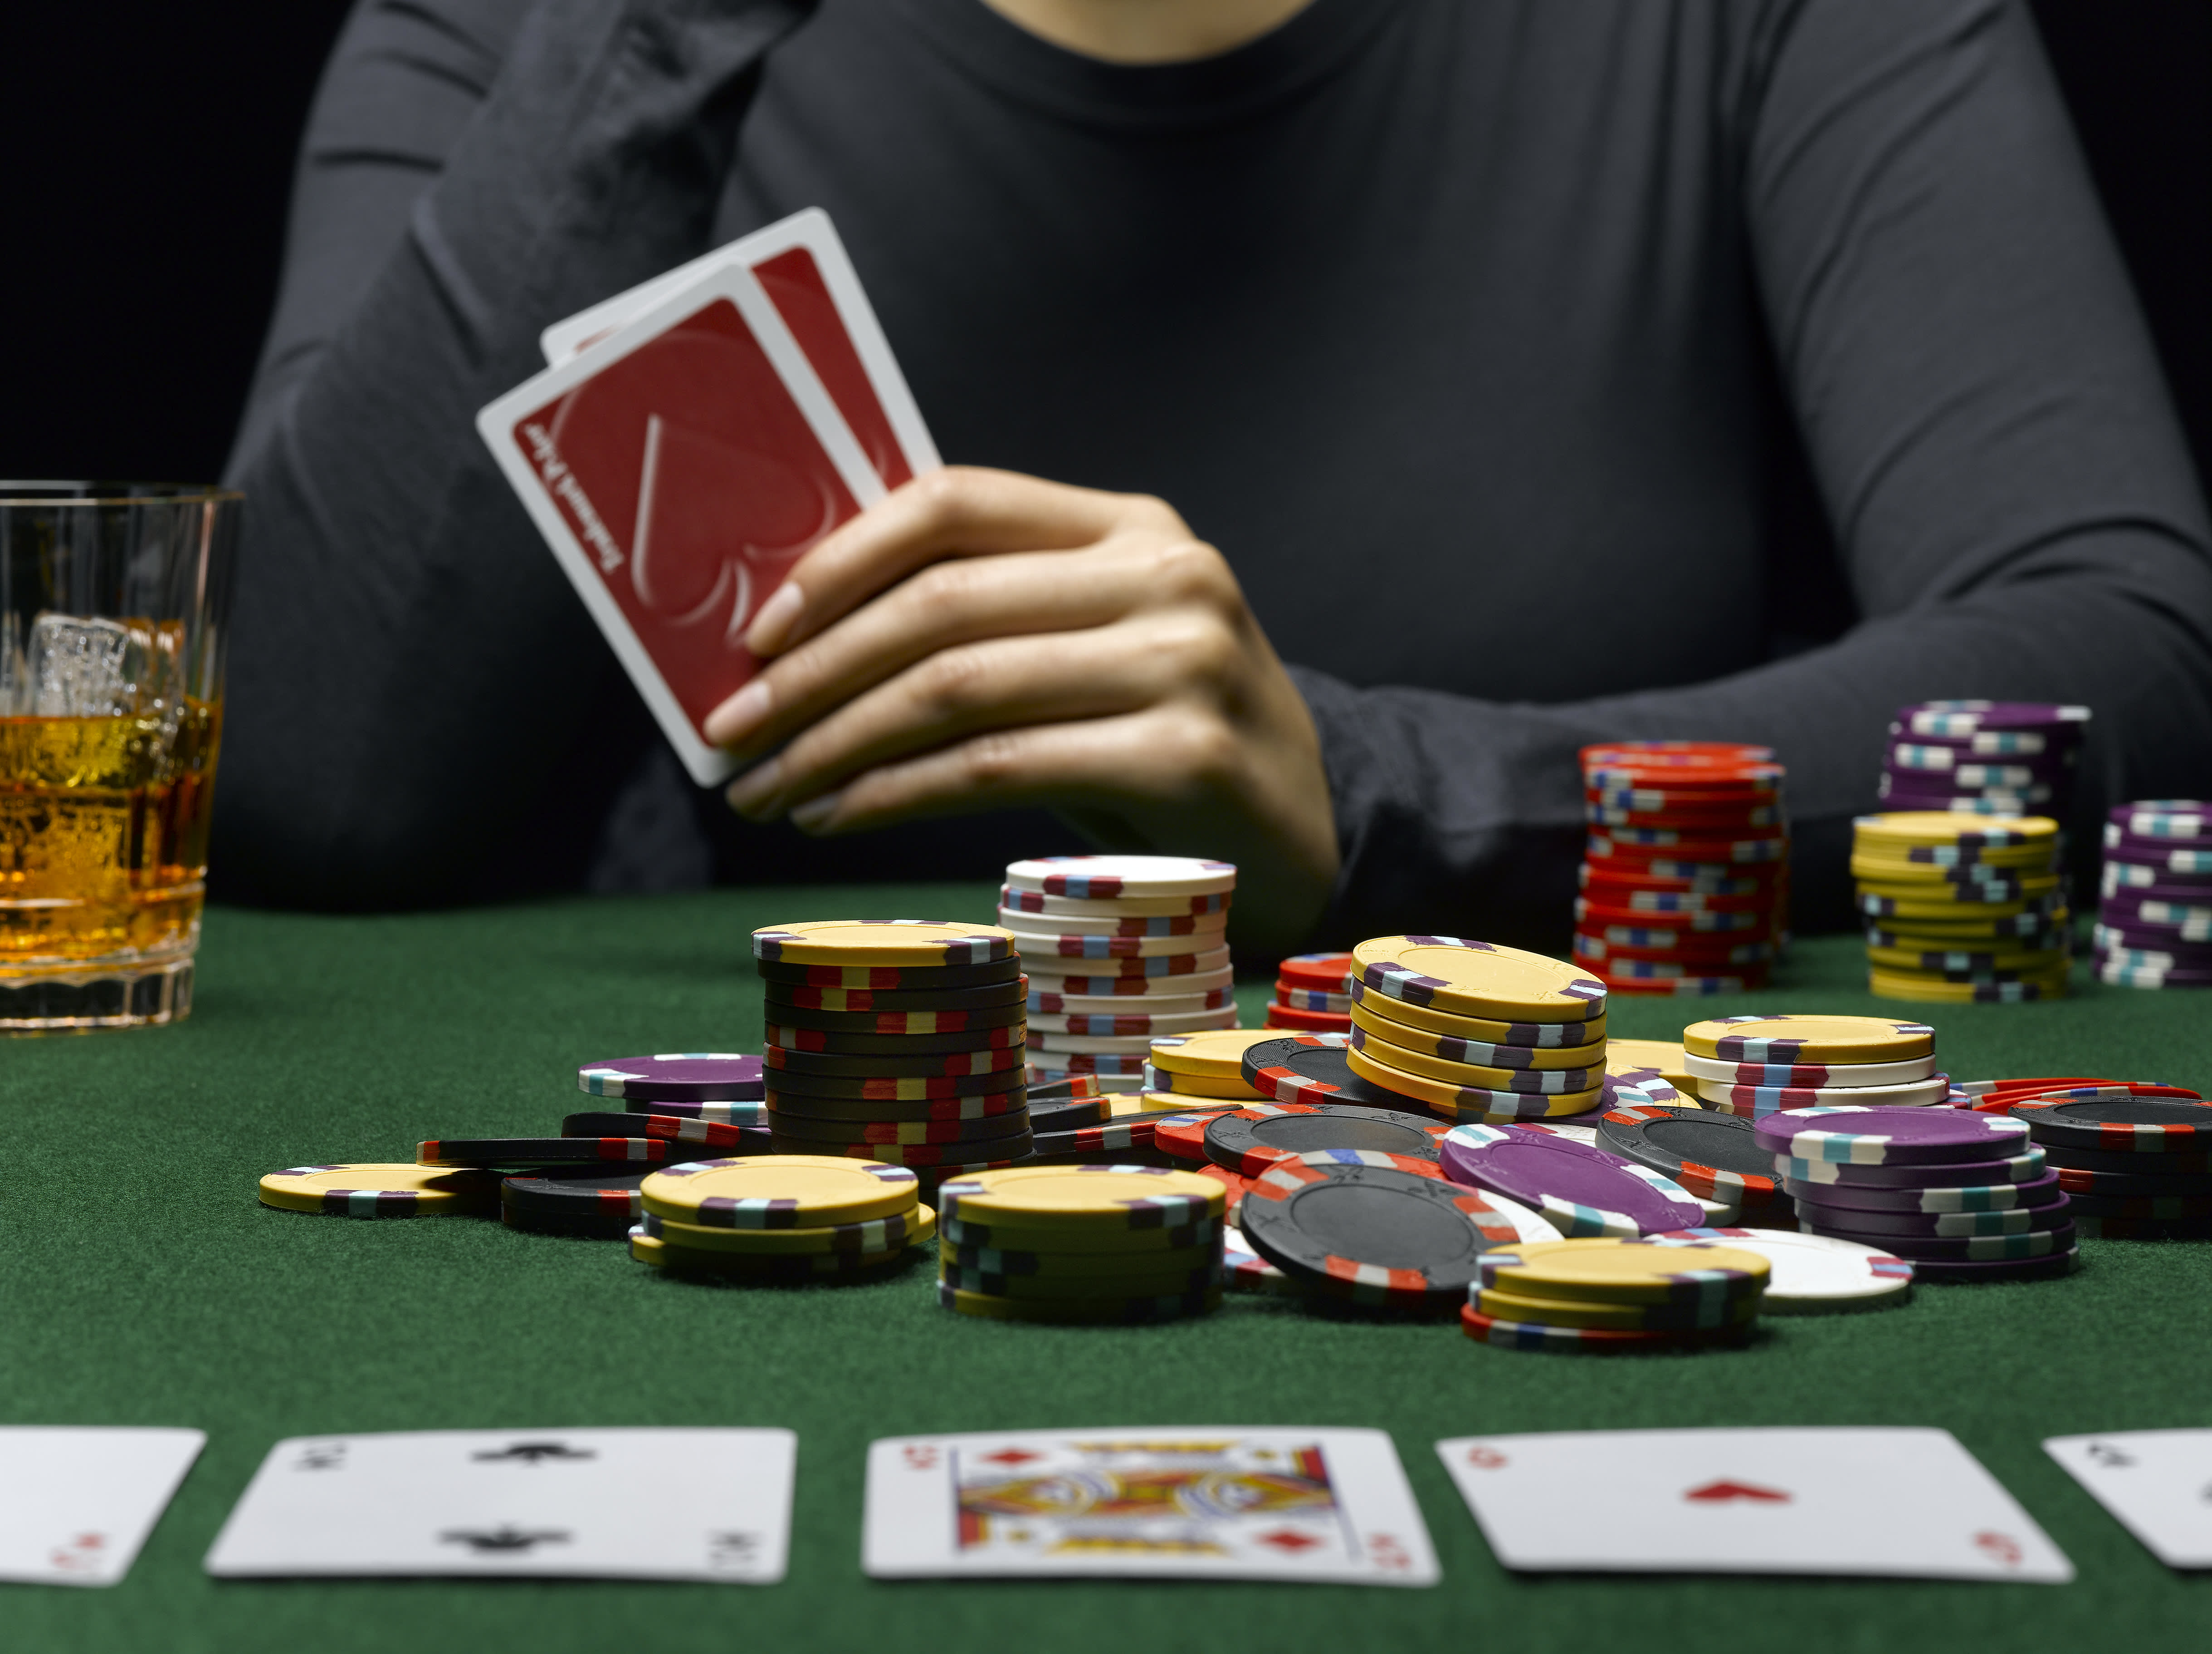 The happy loser: In poker and in trading, a big loss can be a big win